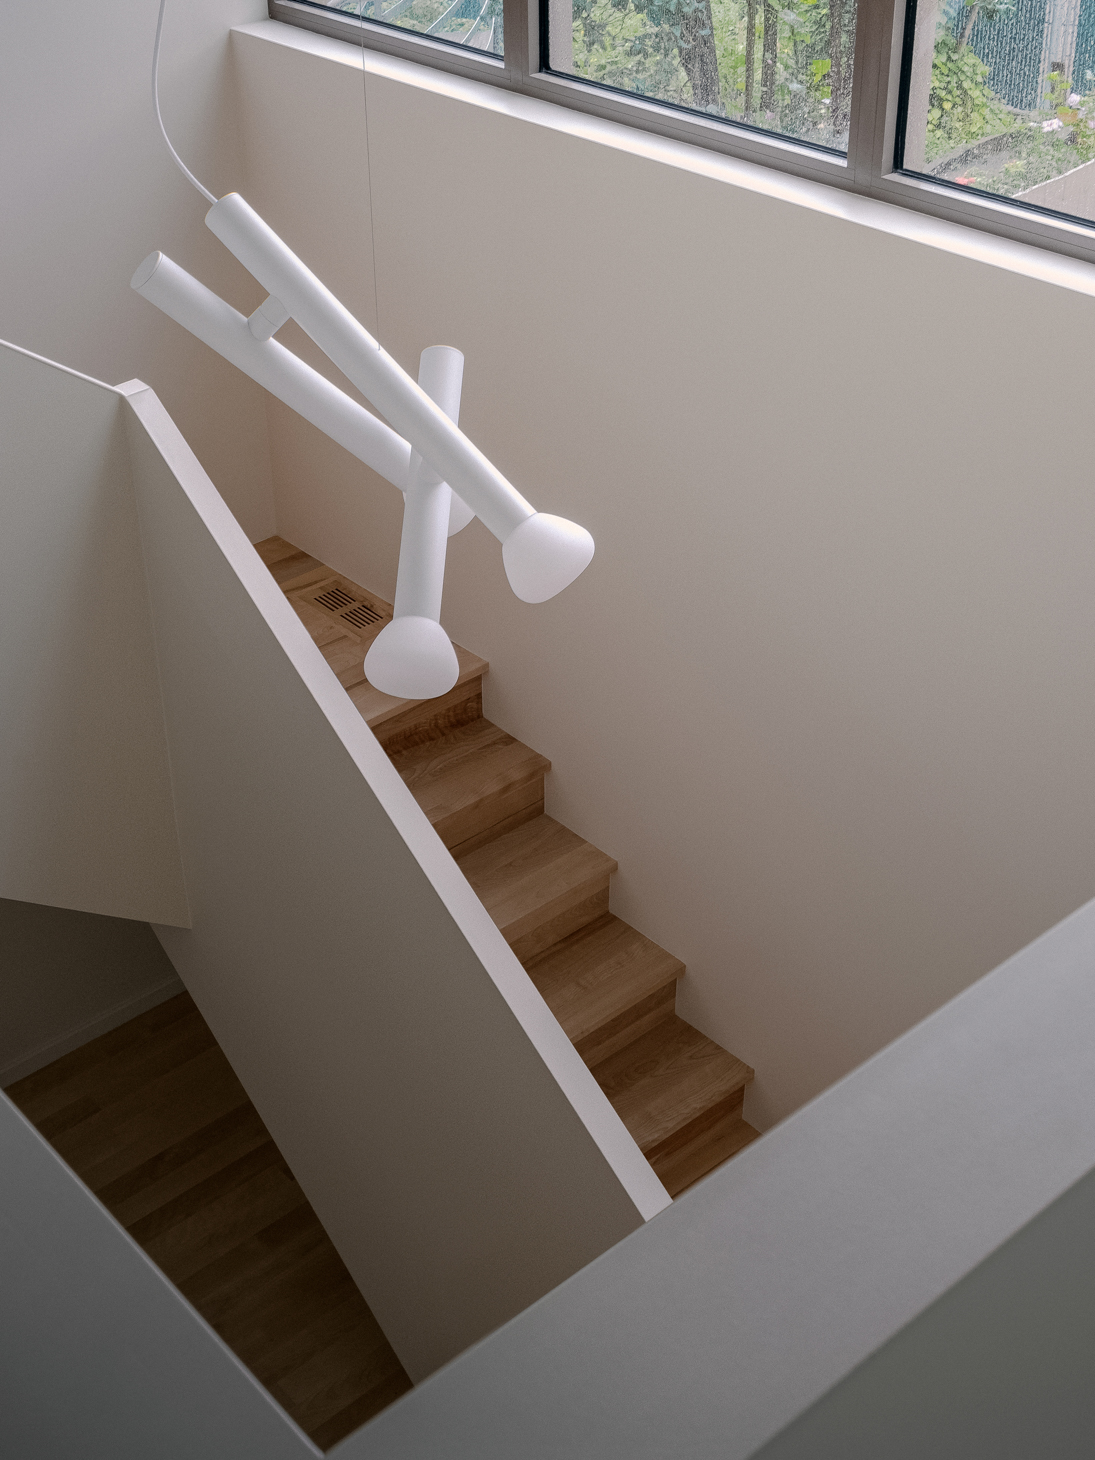 Stairs in Les Sillages by Appareil Architecture